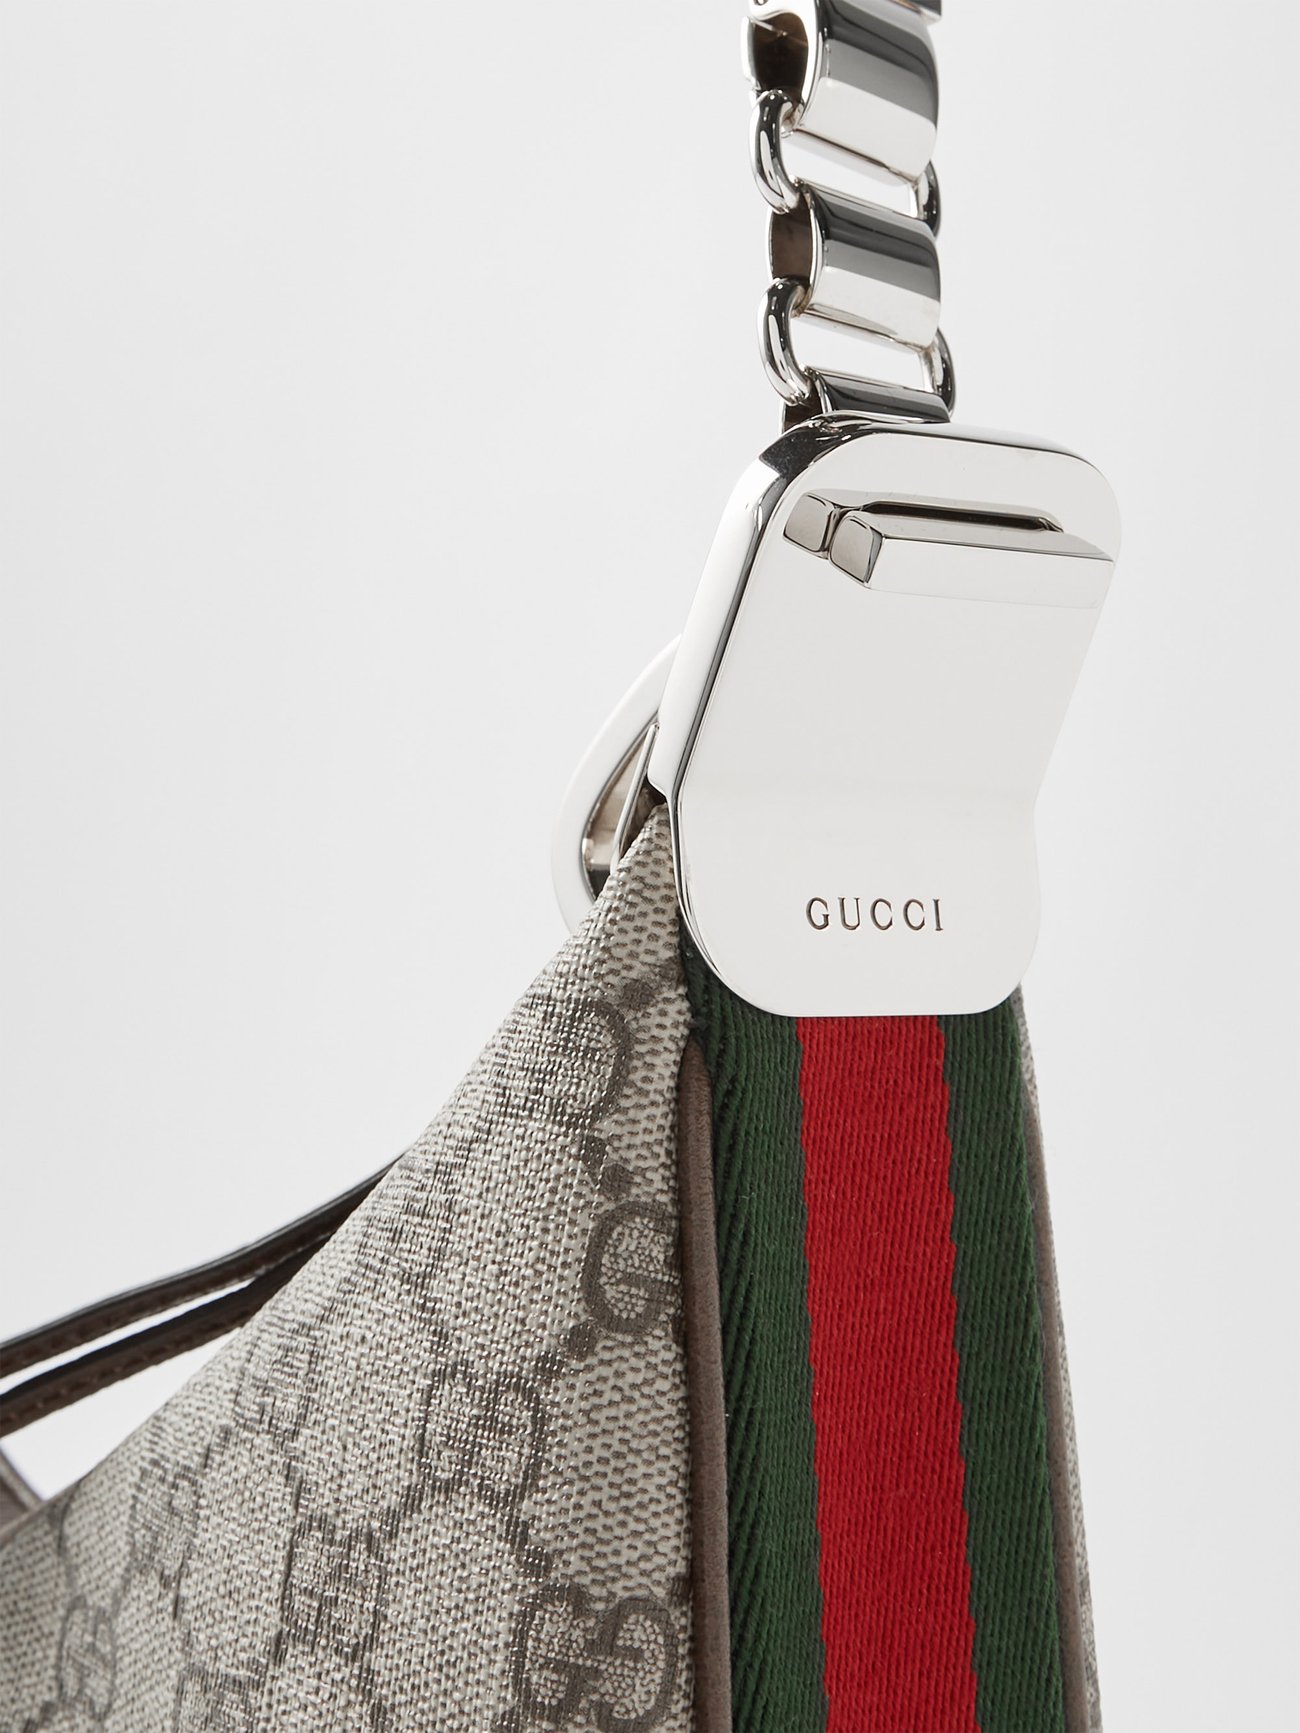 Gucci Attache Large Textured Leather-trimmed Coated-canvas Shoulder Bag - Beige - One Size